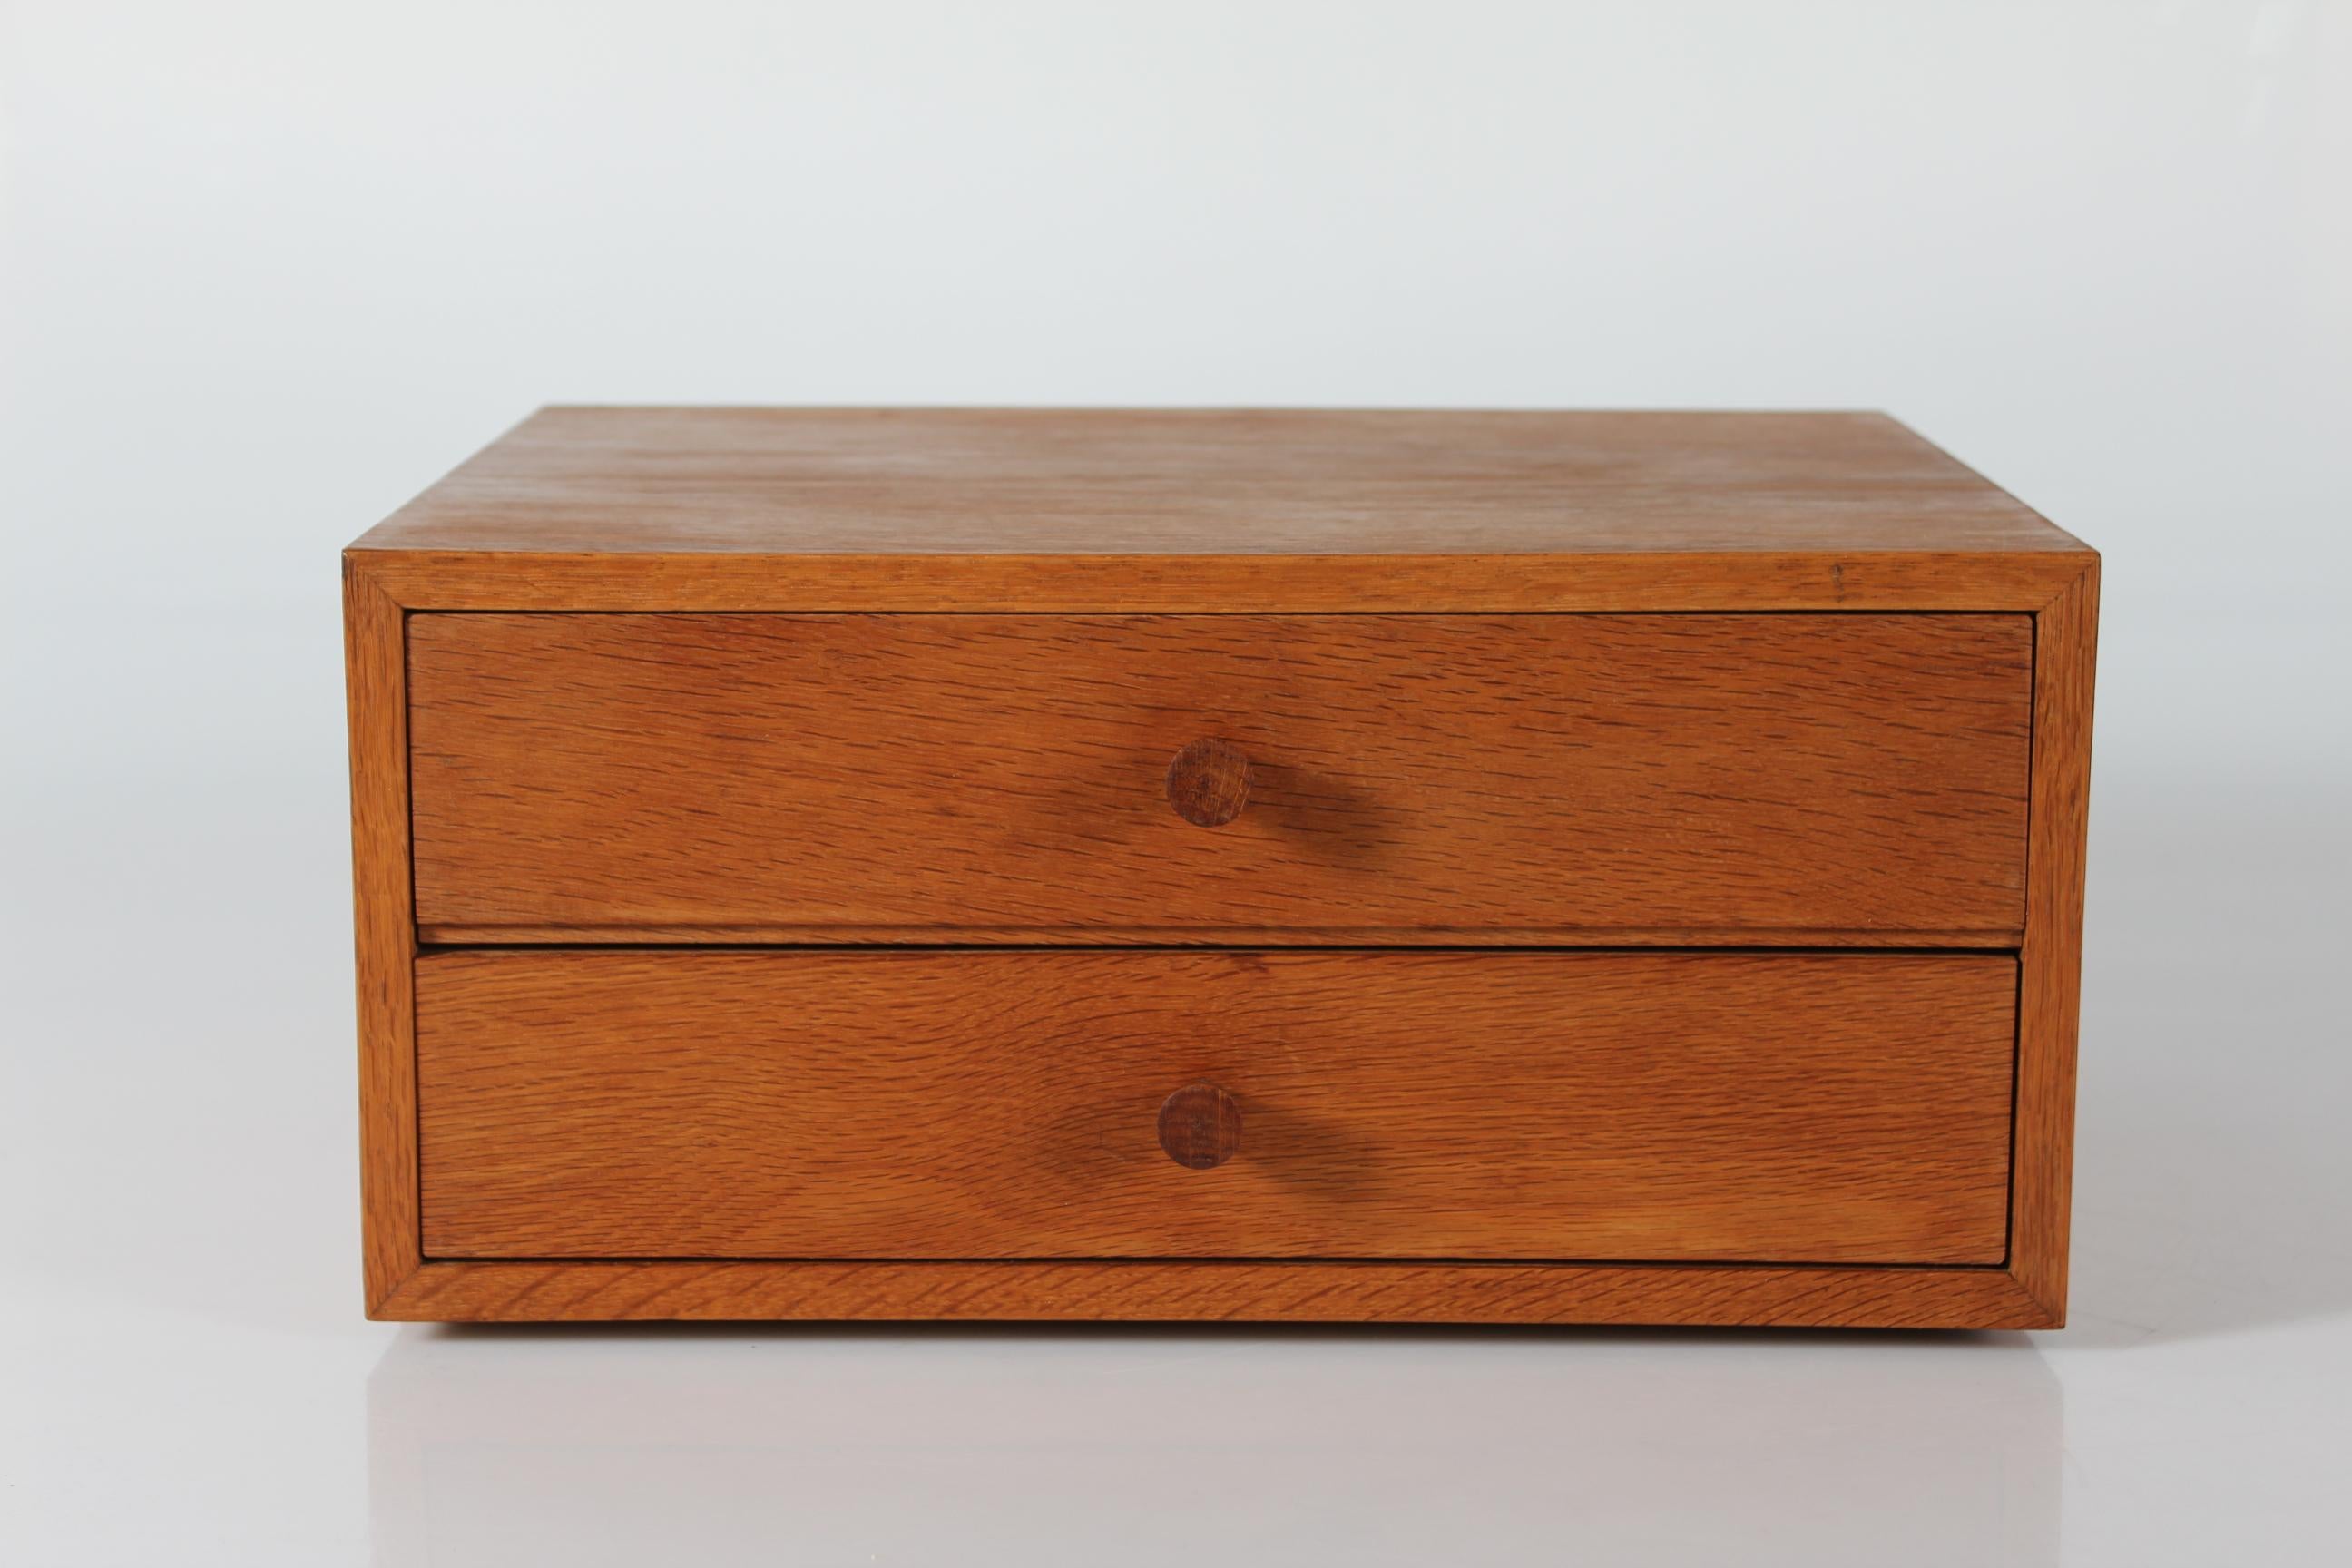 Mid-century Scandinavian small chest of drawers made from oak with a beautiful warm patina. It’s most like made in Denmark. Manufactured ca 1960s. 

The front of the drawers and the knobs are made from solid oak. The other visible surfaces are made